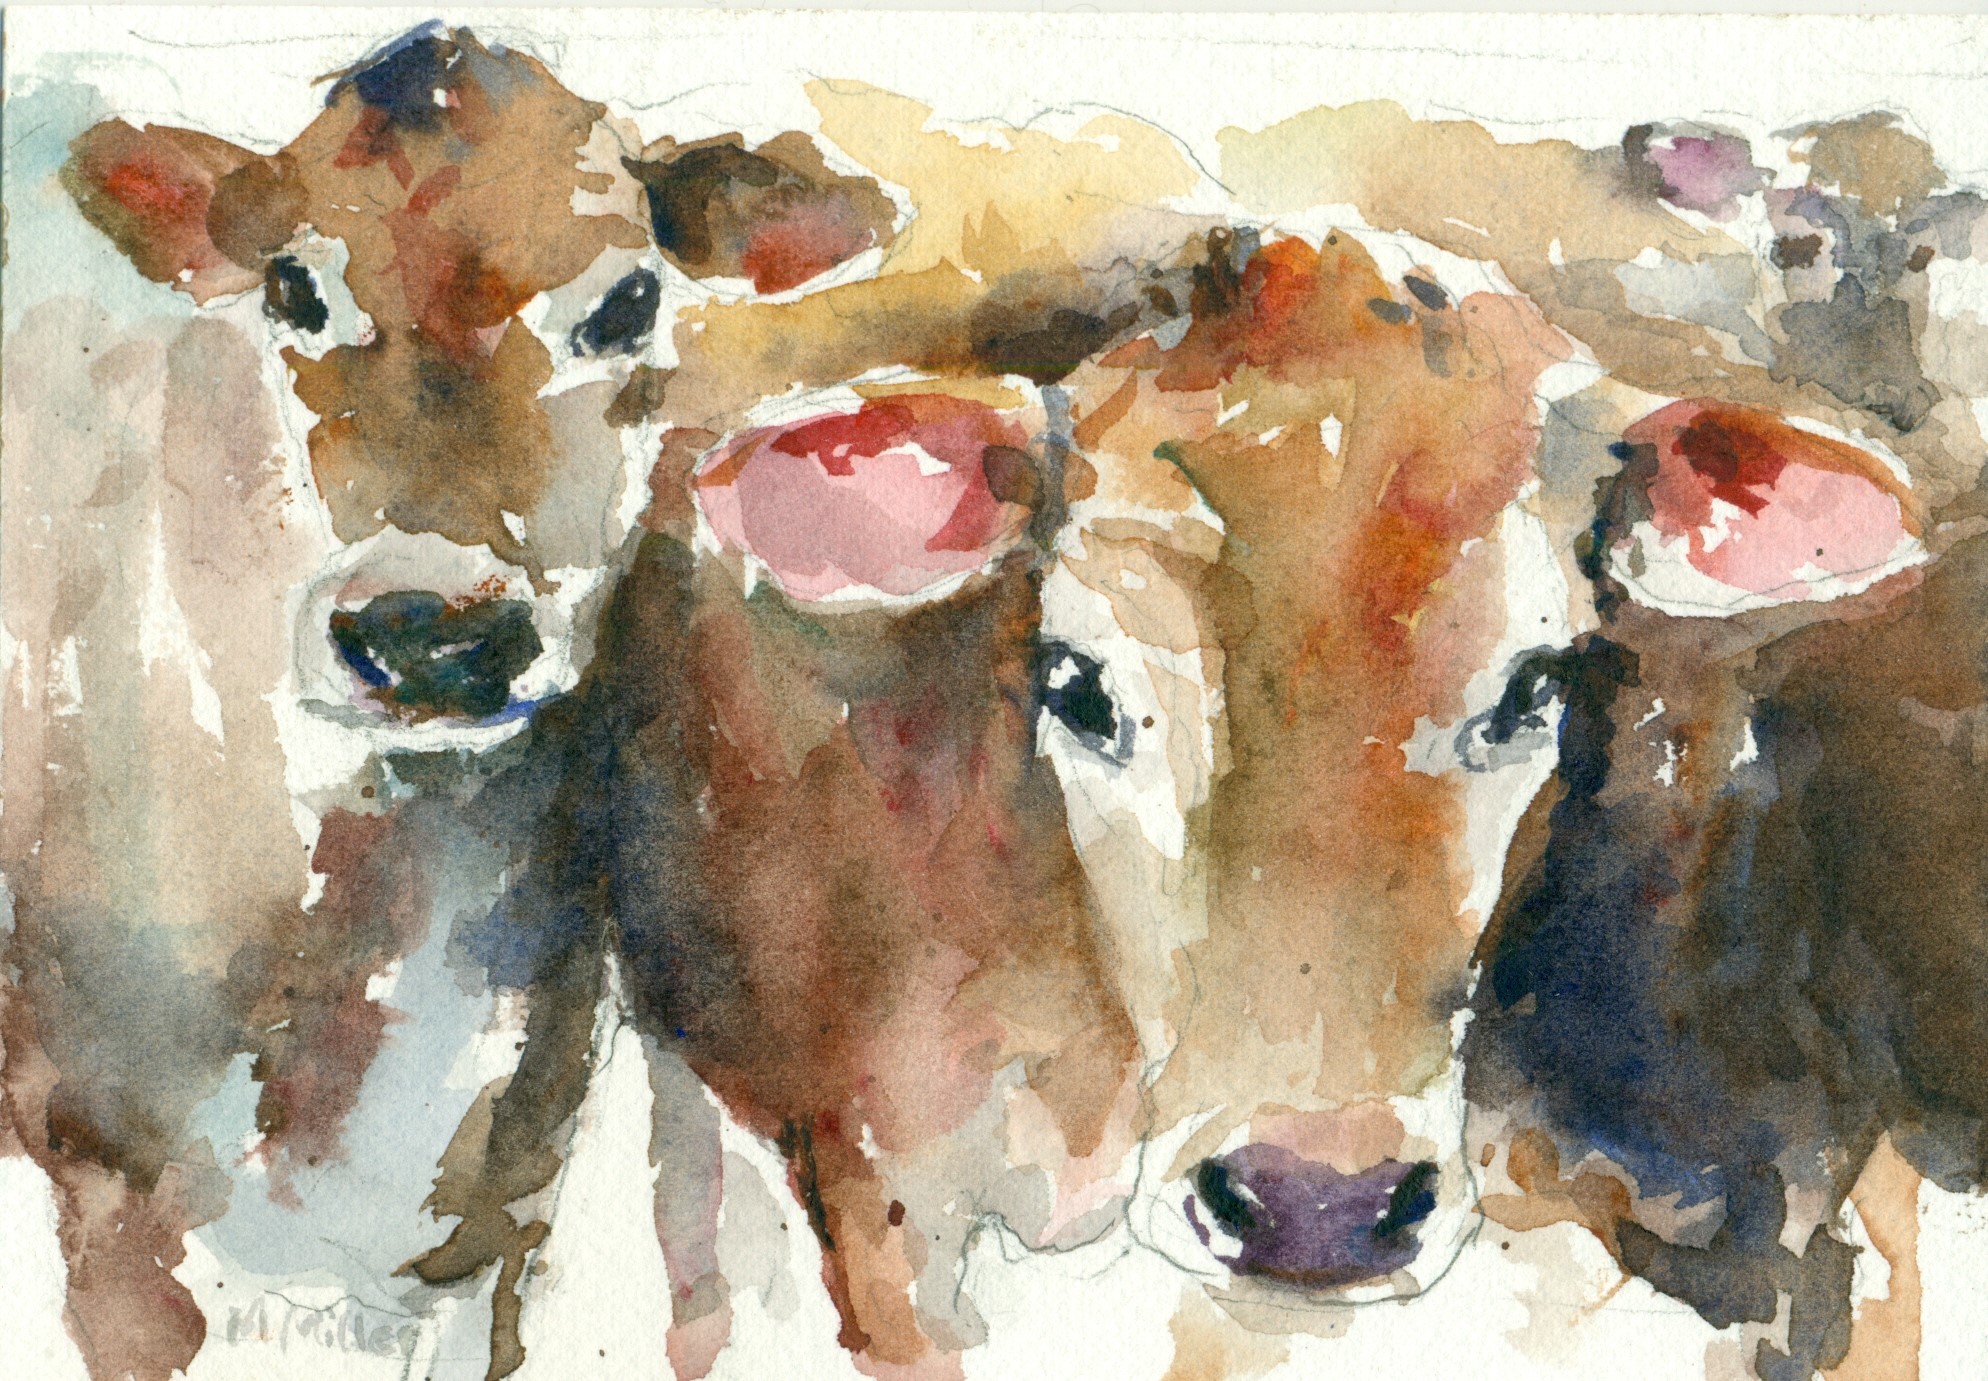 Watercolour painting of cattle in herd. Close-up of the faces of two Jersey cows, looking straight ahead to artist/audience.